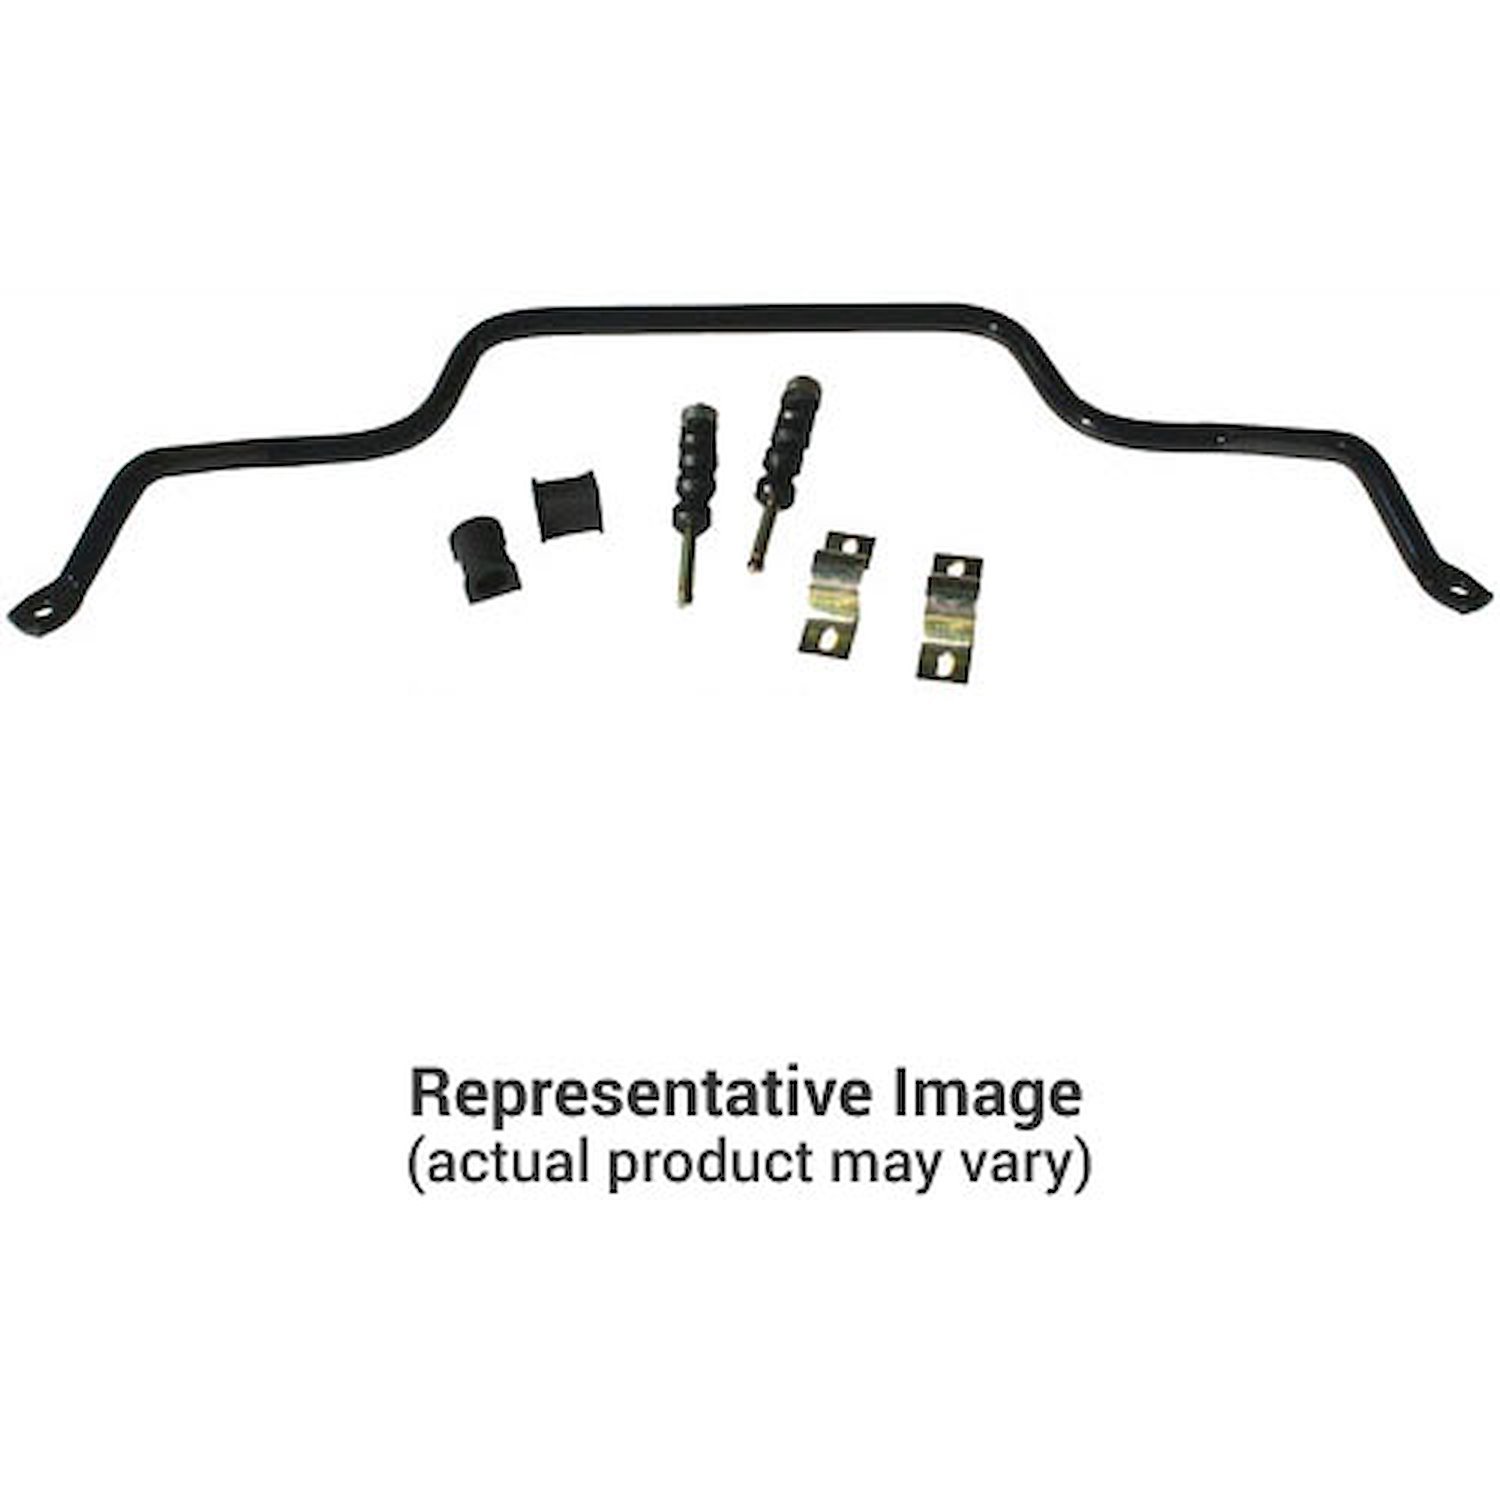 1 1/4" Front Sway Bar 1992-01 Ford E-150